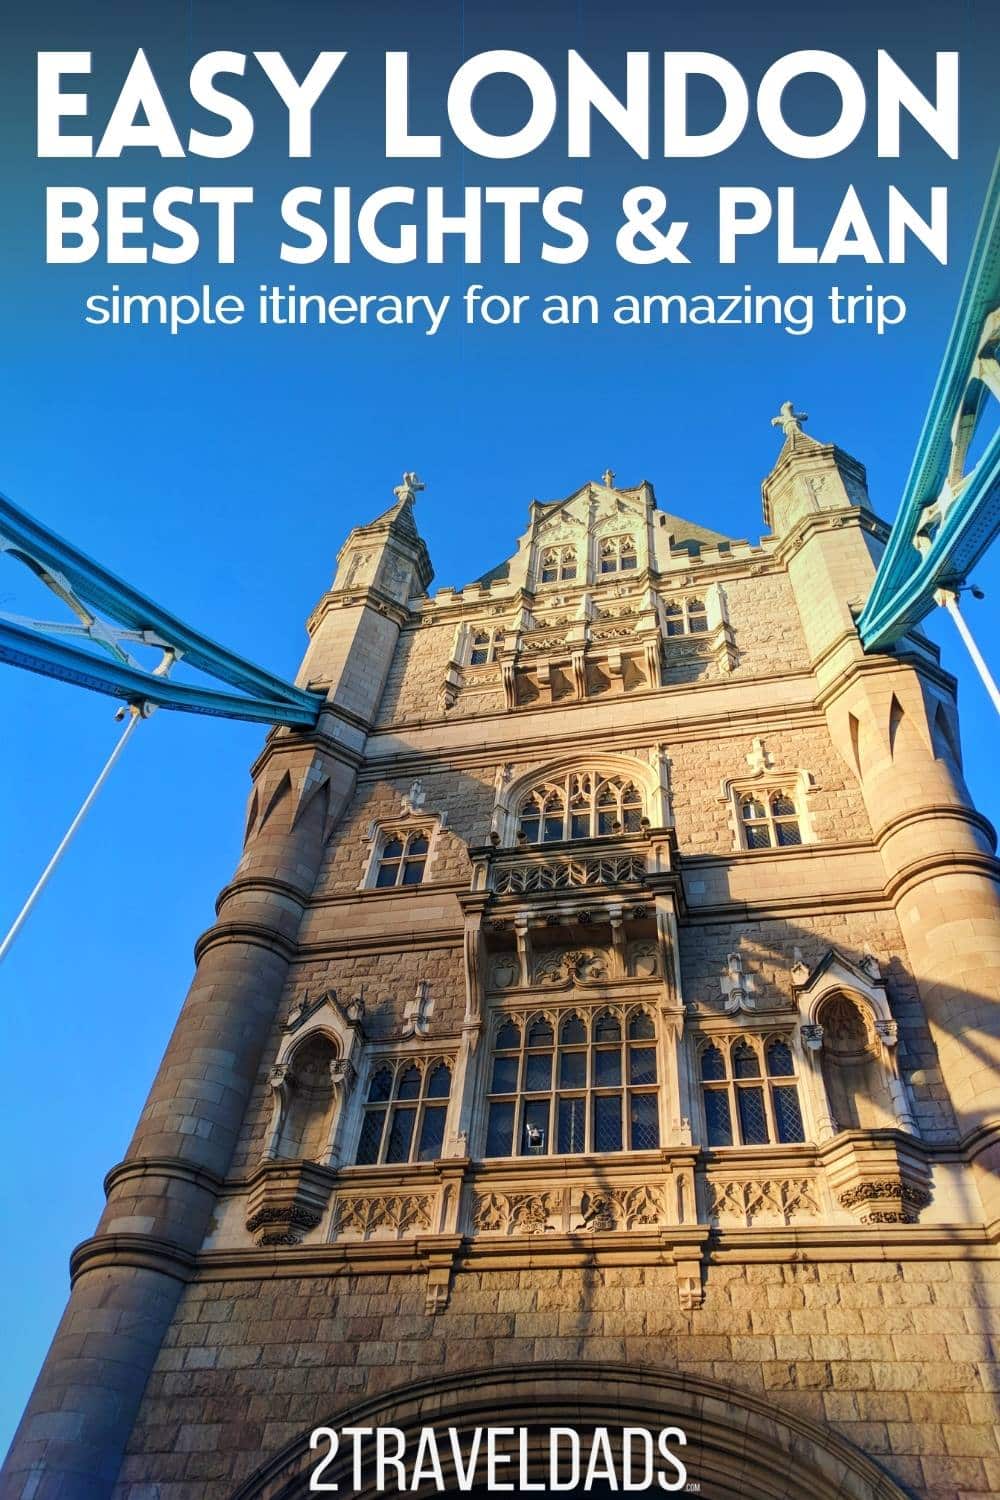 Easy London itinerary for seeing the most iconic sights, best museums and hidden gems that make London so special. Tips for solo or group travel, including fun food to watch for and local markets.